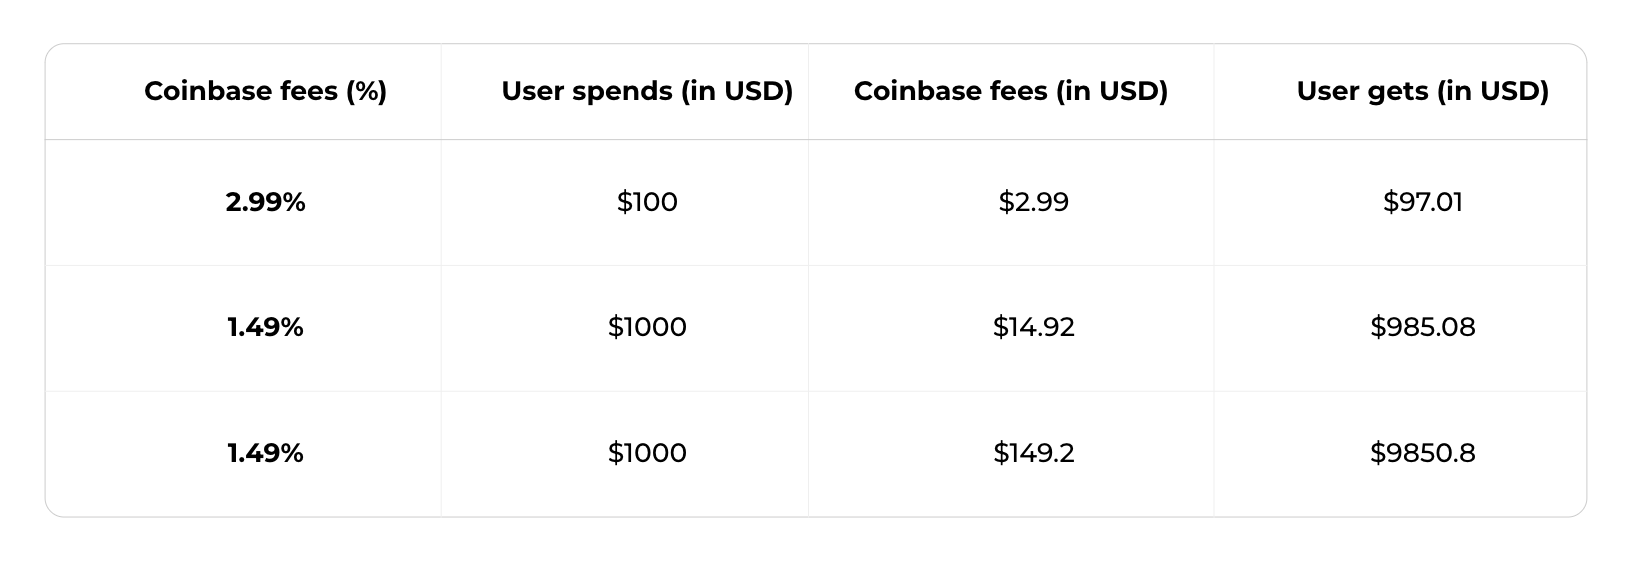 Coinbase Review UK - Features, Fees, Pros & Cons Revealed